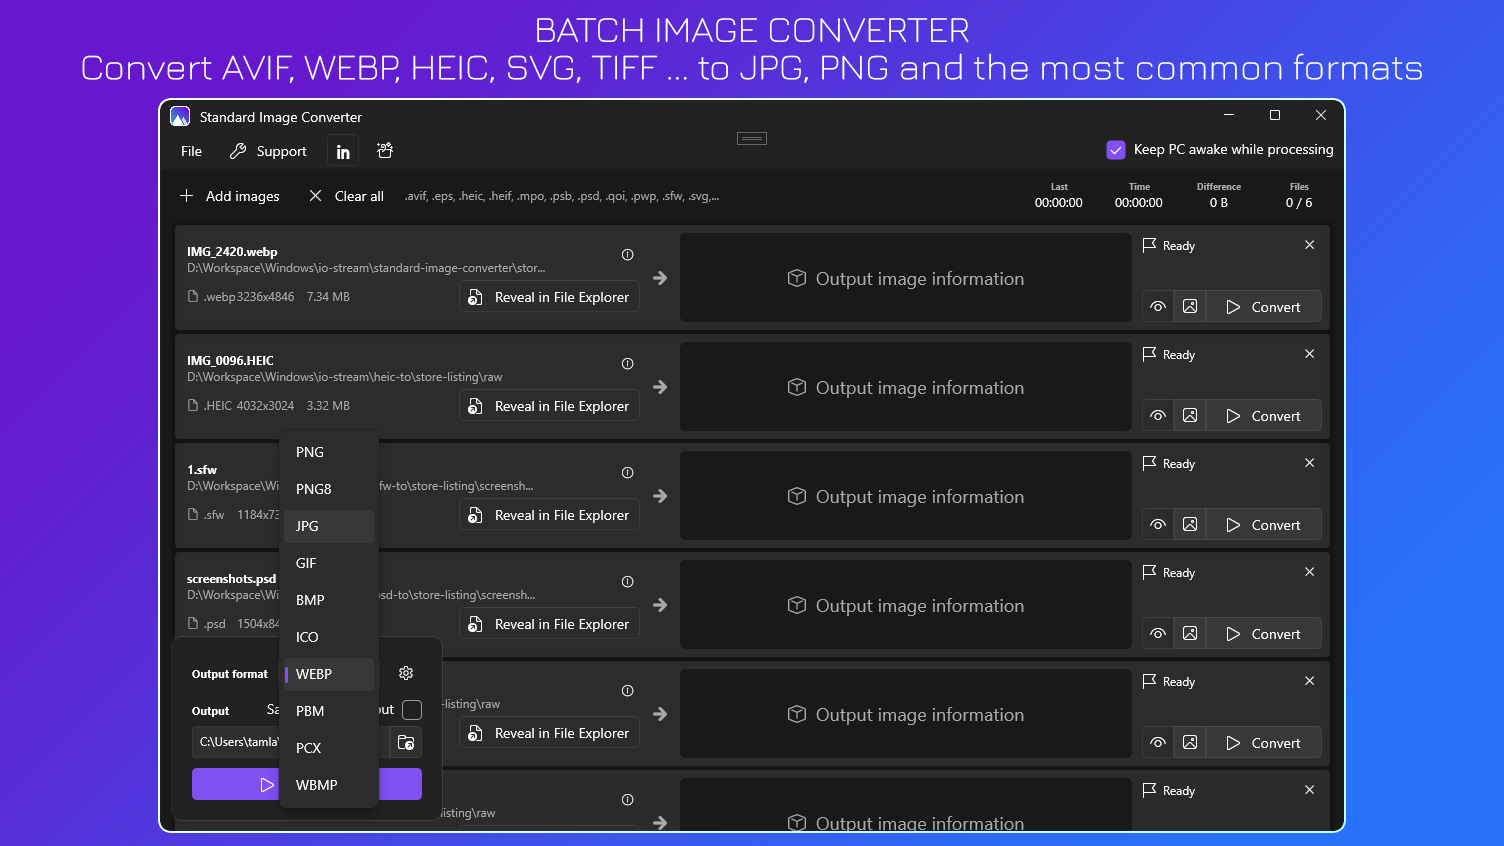 Batch Image Converter - Convert AVIF, WEBP, HEIC, SVG, TIFF, … to JPG, PNG and the most common formats.